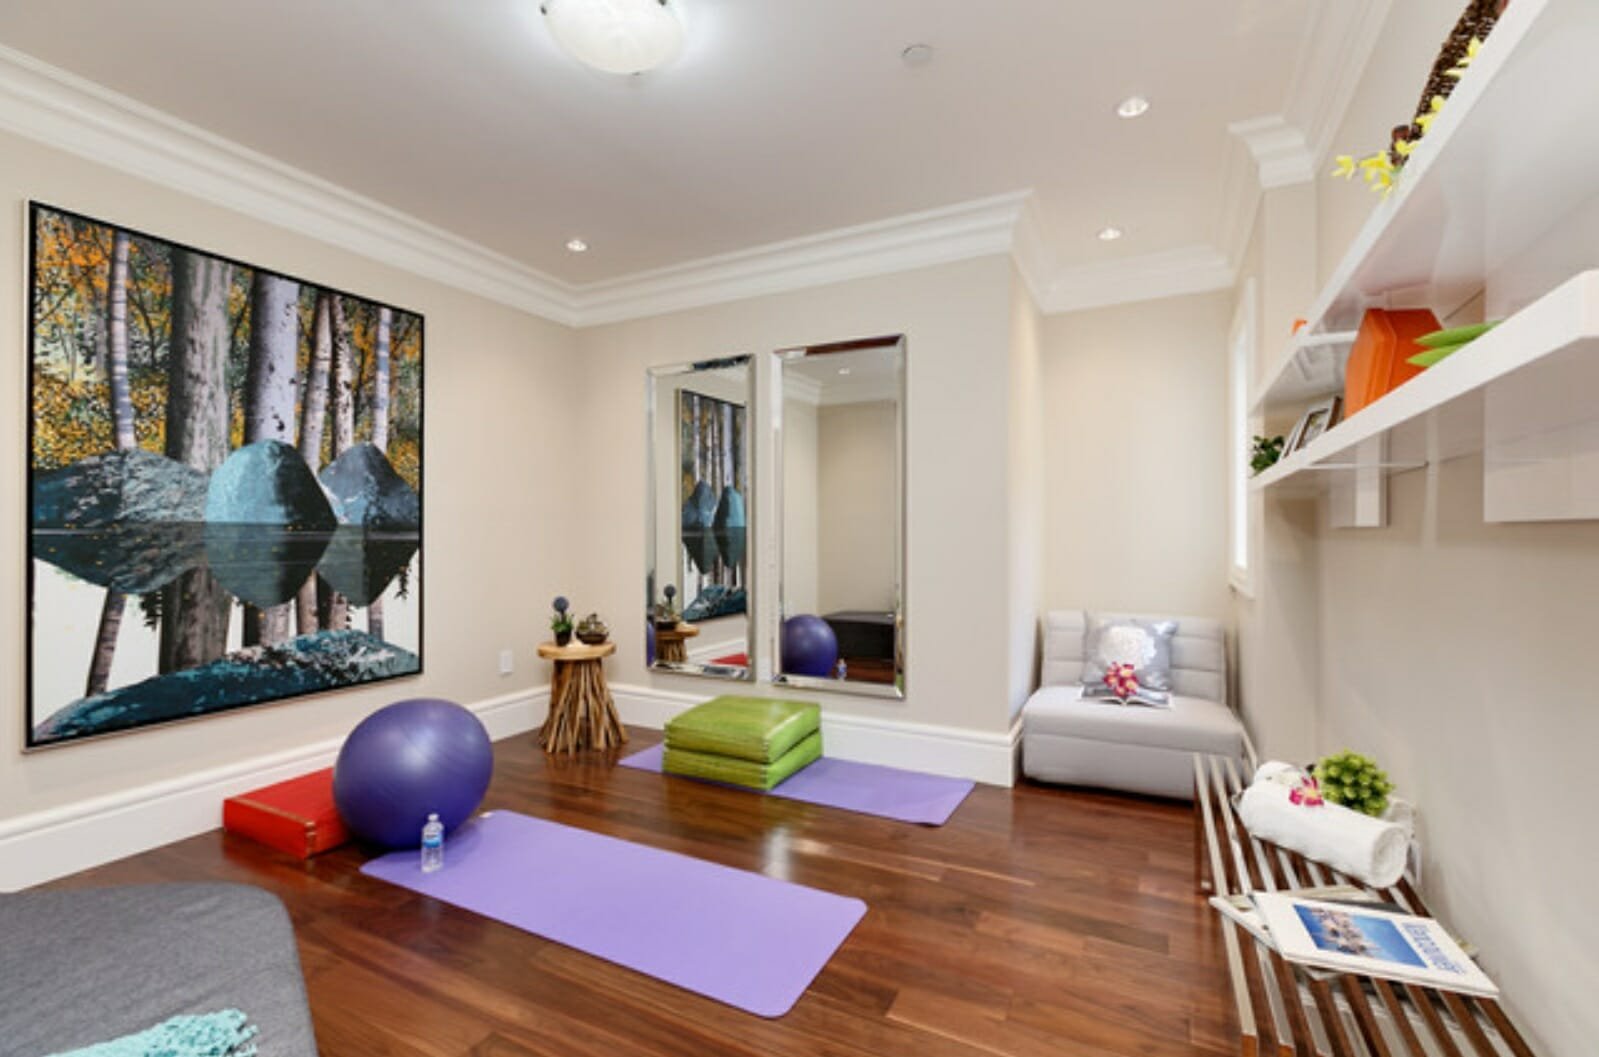 Before & After: Colorful and Calming Yoga Room Design | Decorilla